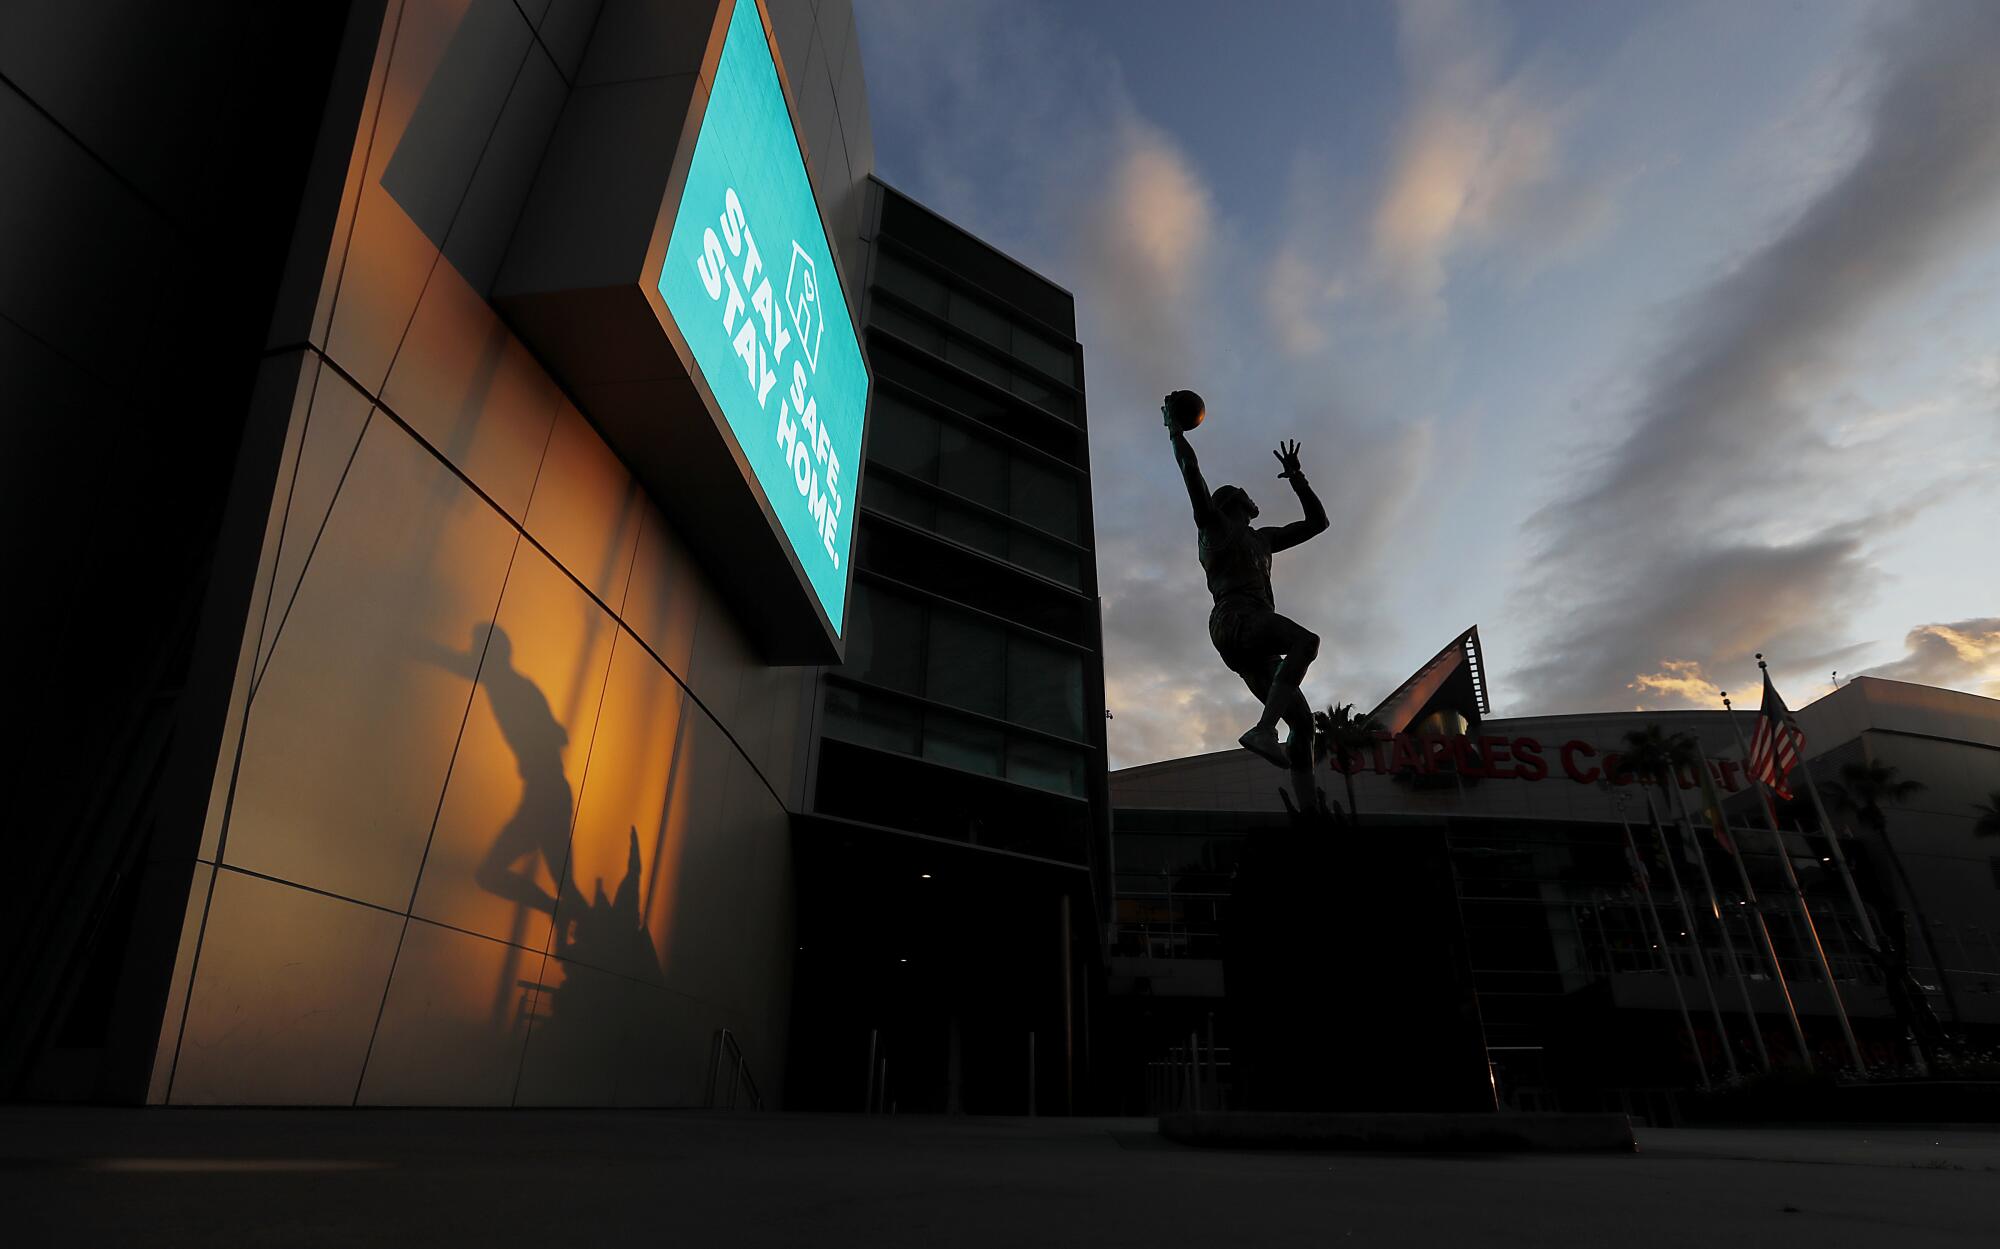 The shadow of a statue of Magic Johnson, left, and a statue of Kareem Abdul Jabbar are frozen in time at Staples Center, where the lights are off and events have been suspended due to the coronavirus pandemic.